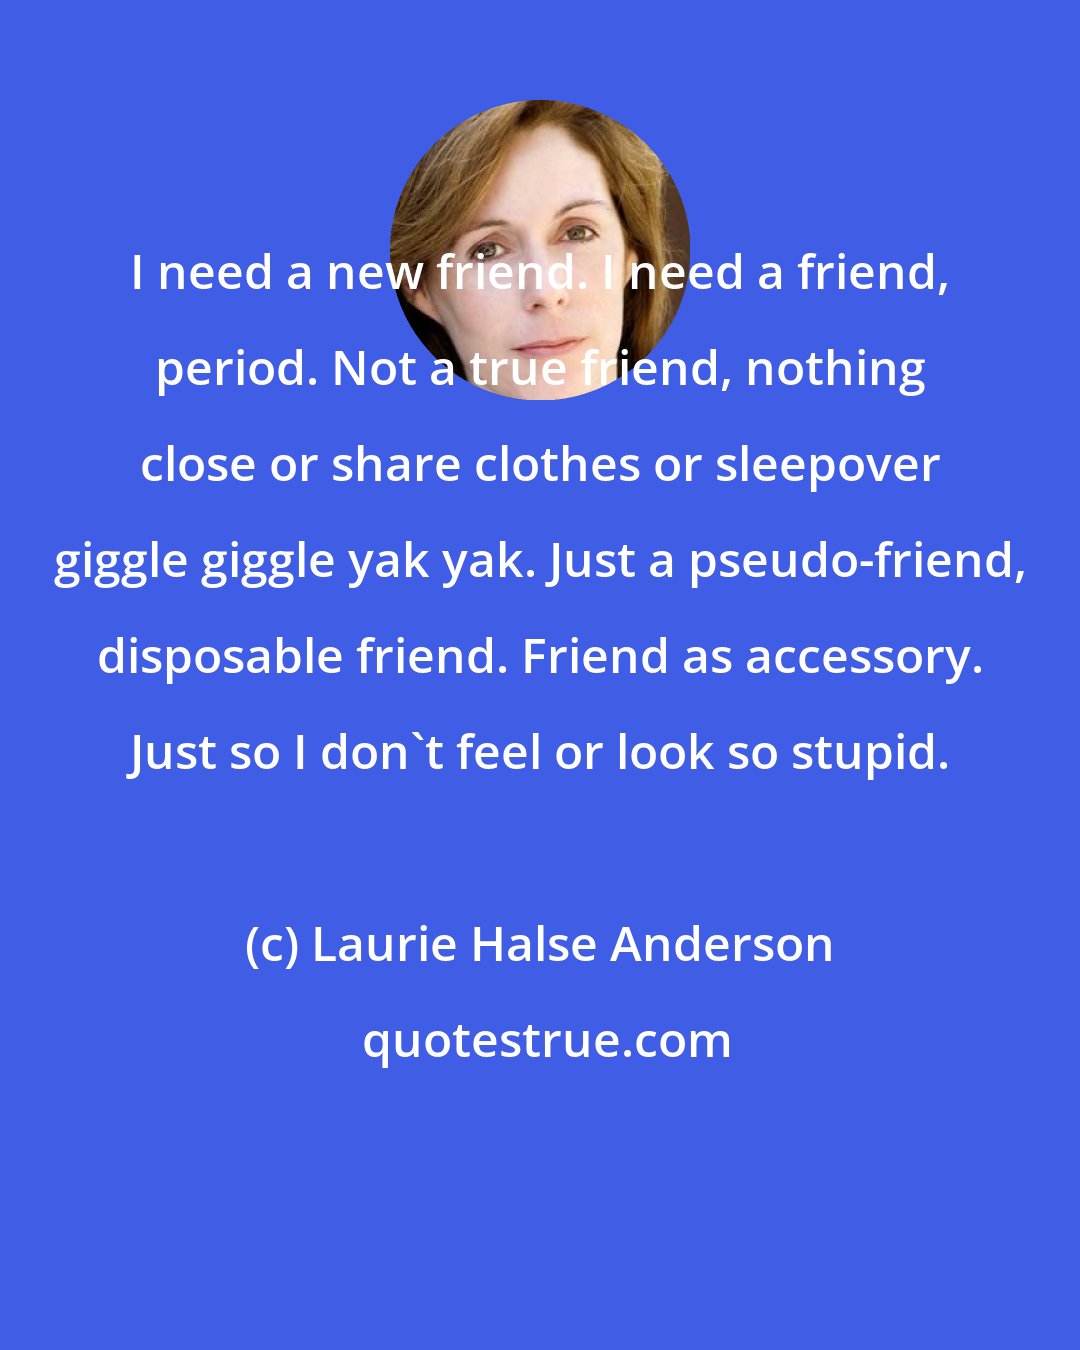 Laurie Halse Anderson: I need a new friend. I need a friend, period. Not a true friend, nothing close or share clothes or sleepover giggle giggle yak yak. Just a pseudo-friend, disposable friend. Friend as accessory. Just so I don't feel or look so stupid.